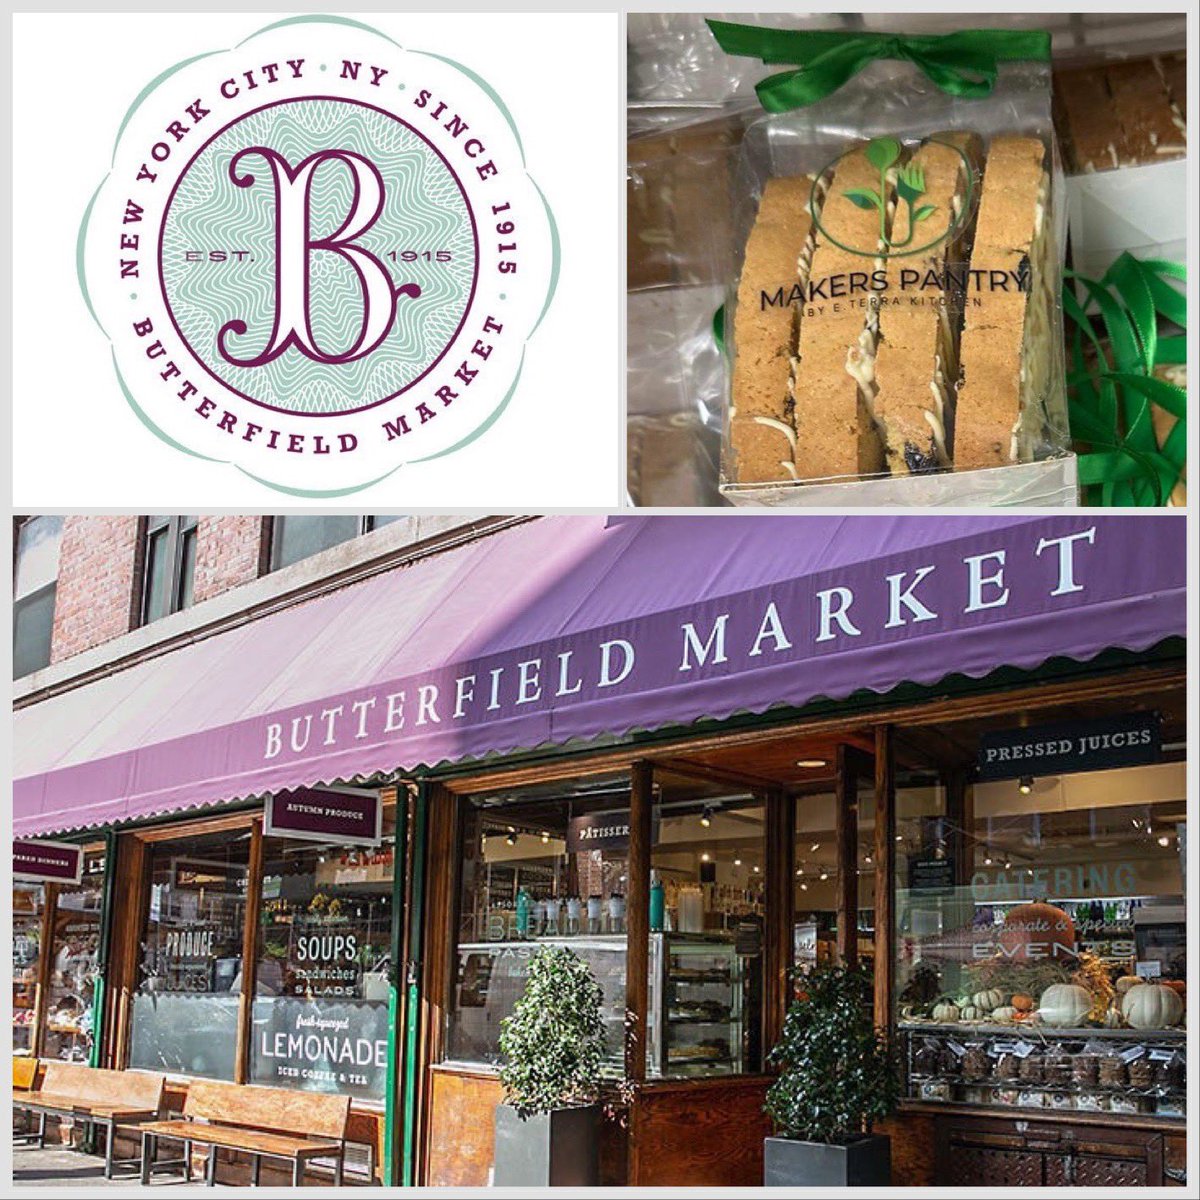 Congrats to Our Sister Company Makers Pantry! Now at @ButterfieldNYC 
#biscottis #nycdesserts #butterfieldnyc #nycbesteats #nycbestdesserts #nycgournetmarket #nycbesteats #eatingnyc #nyceats #bestdesserts #bestofnyc #ilovenyc #supportlocalnyc #womanownedbusiness #nycsmallbusiness